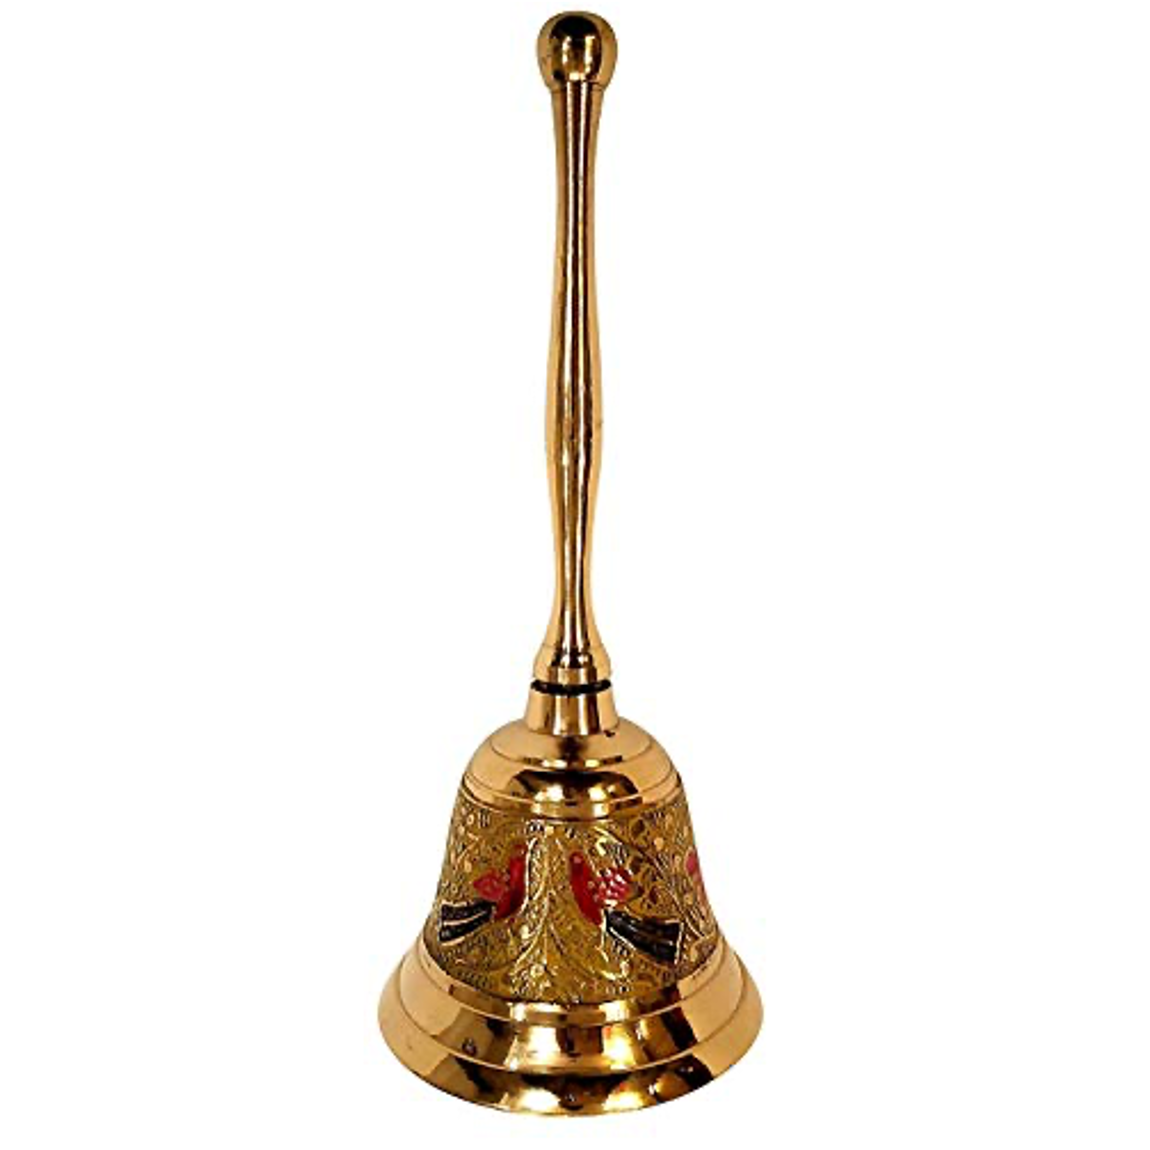 Brass Made Pooja Bell, Engraved Meenakari Work - 6 inch Tall Mangal Fashions | Indian Home Decor and Craft